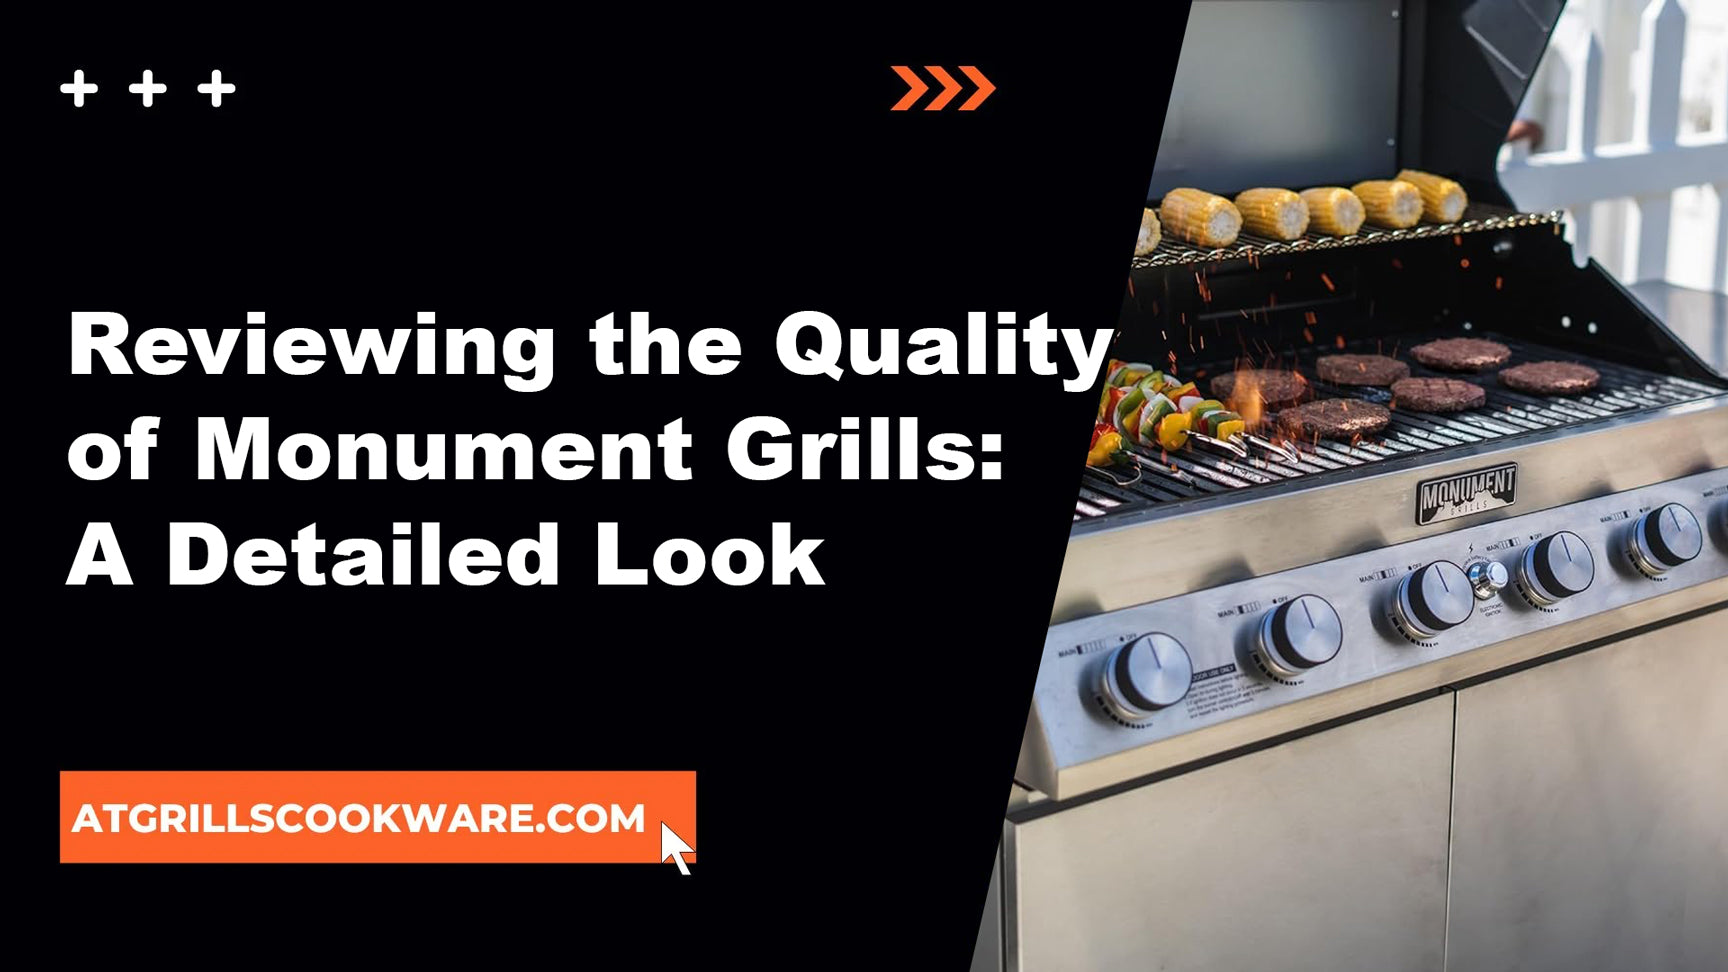 Reviewing the Quality of Monument Grills: A Detailed Look